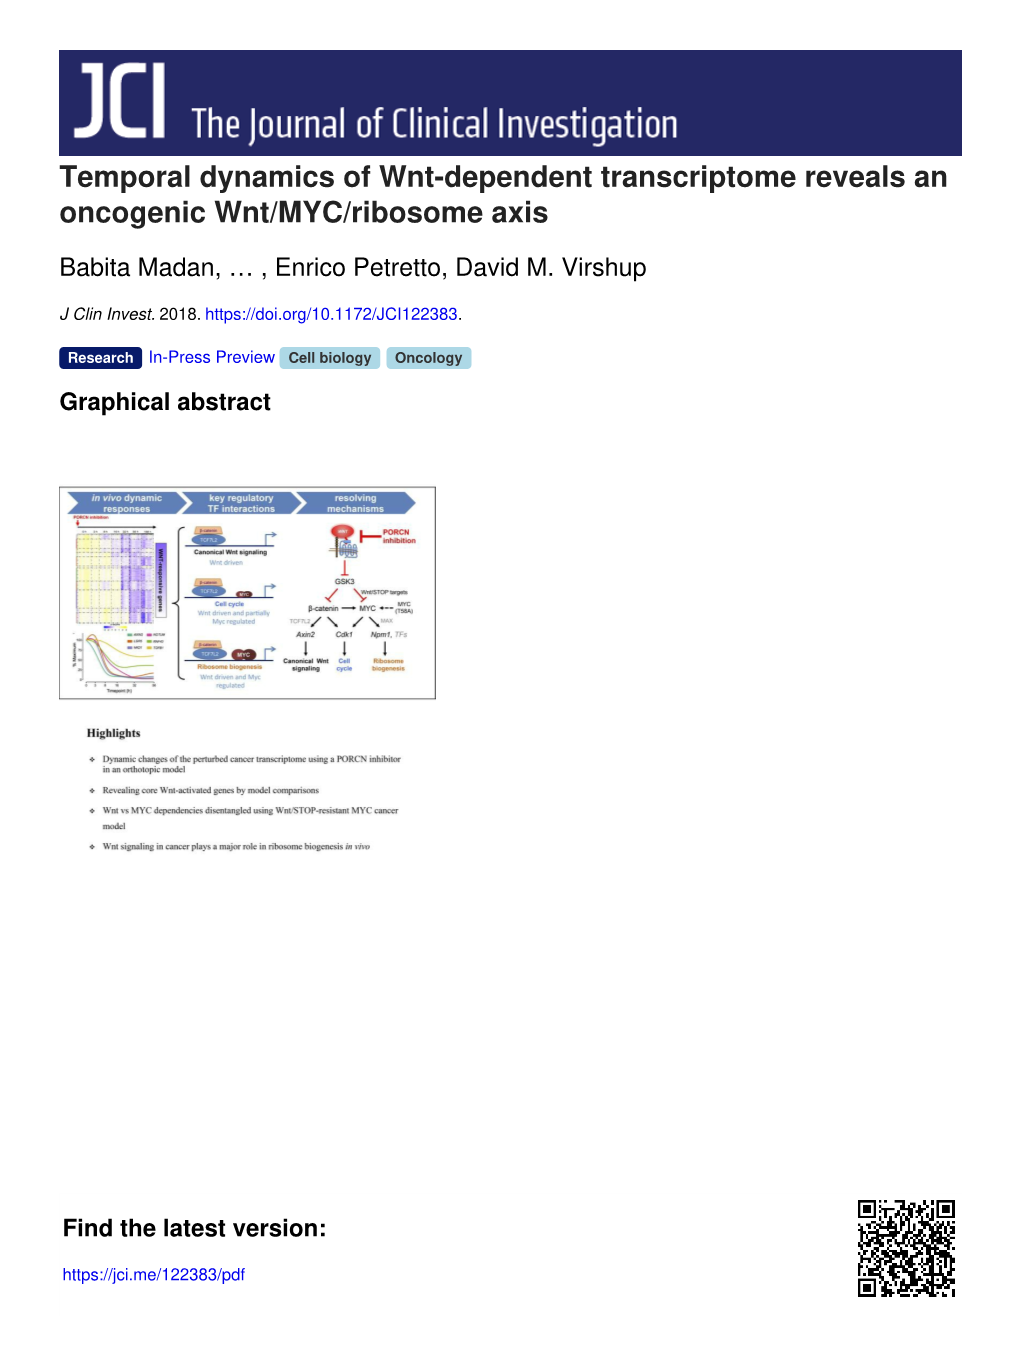 Temporal Dynamics of Wnt-Dependent Transcriptome Reveals an Oncogenic Wnt/MYC/Ribosome Axis